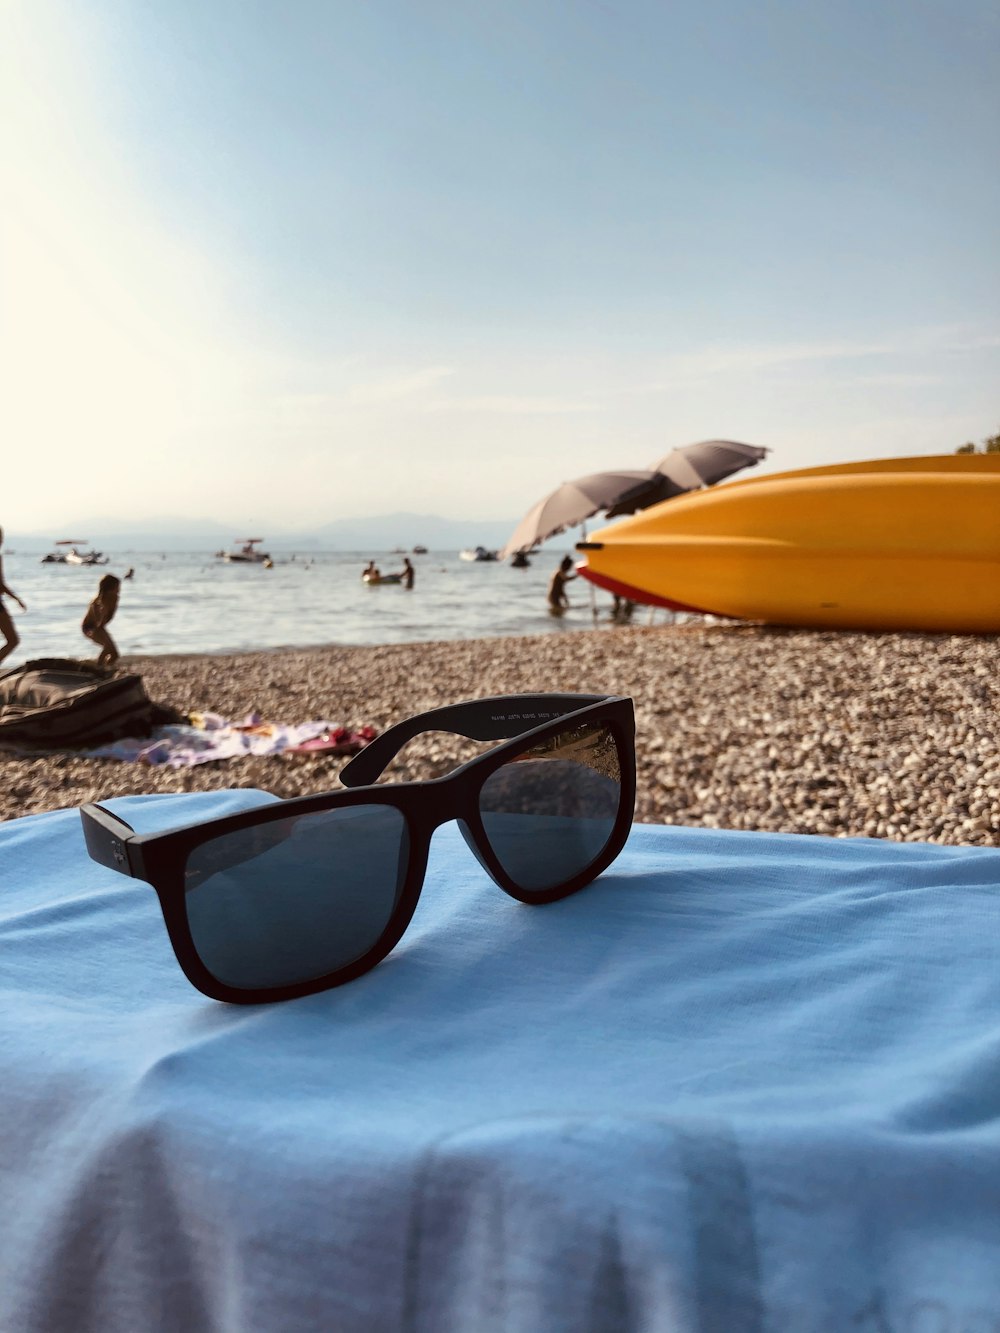 black framed sunglasses on brown sand near body of water during daytime